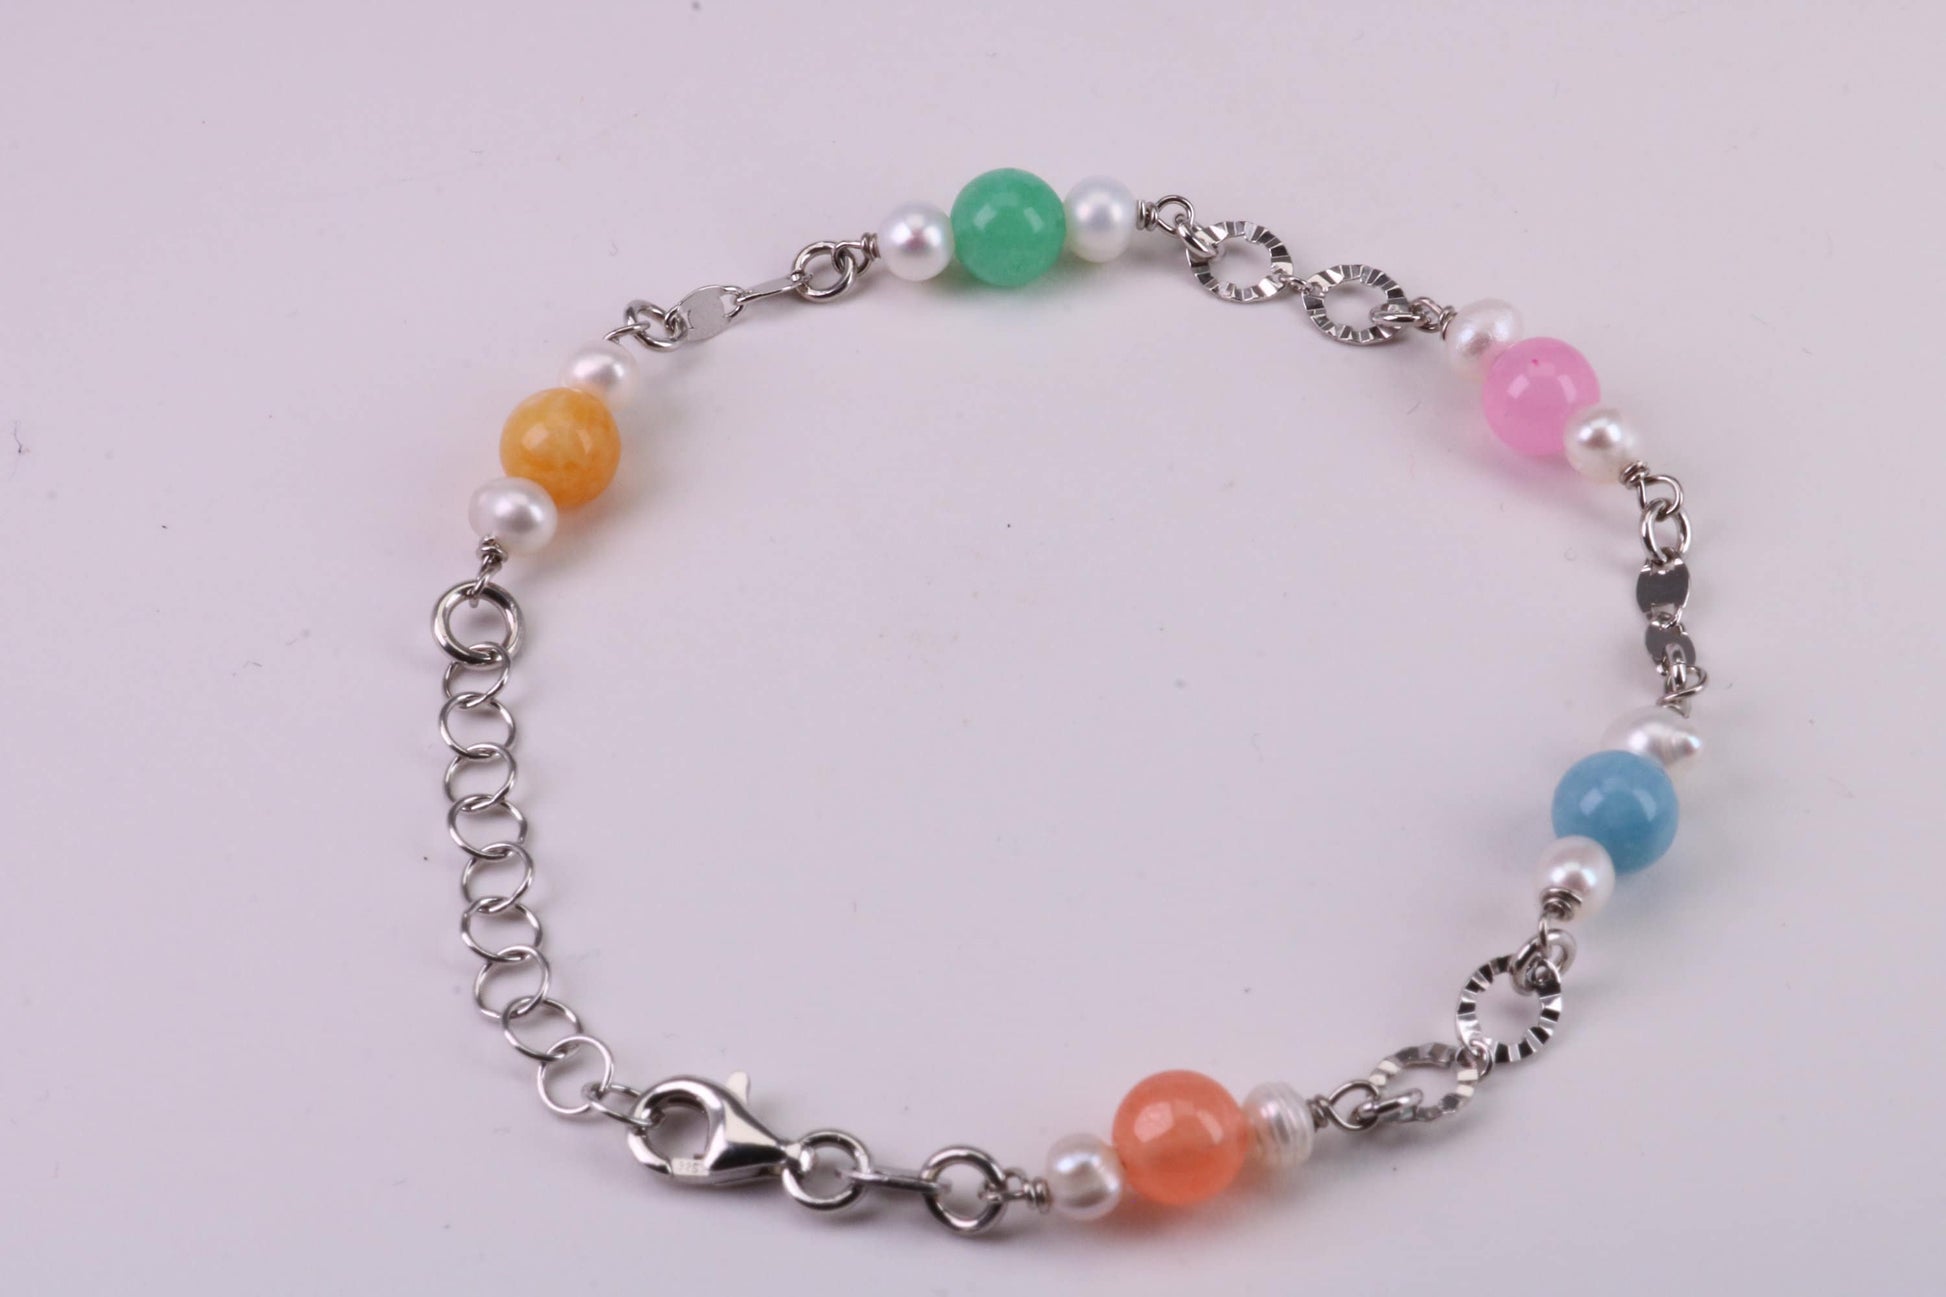 Rainbow Bracelet, With Length Adjustable Chain, Made from solid Sterling Silver